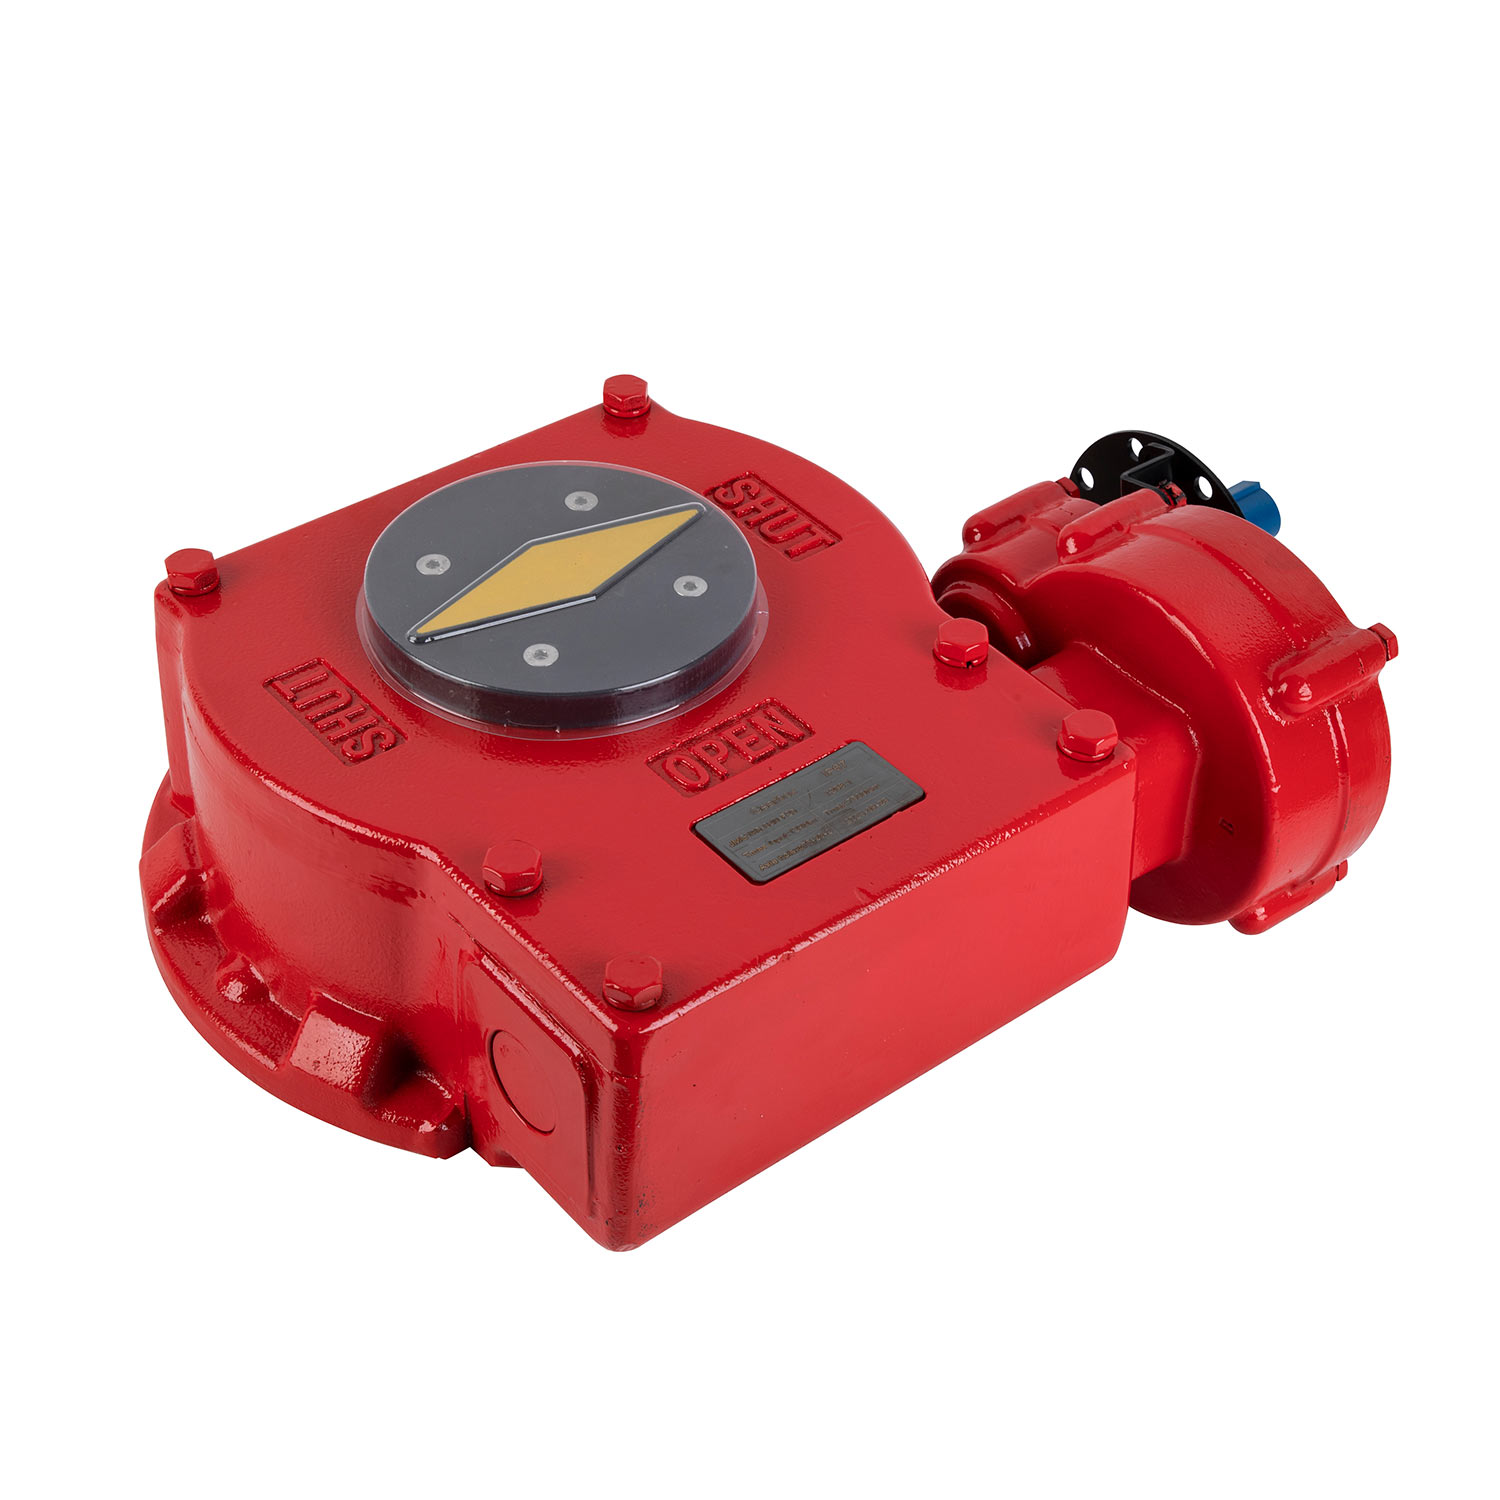 JMG series valve gearbox with reduction unit